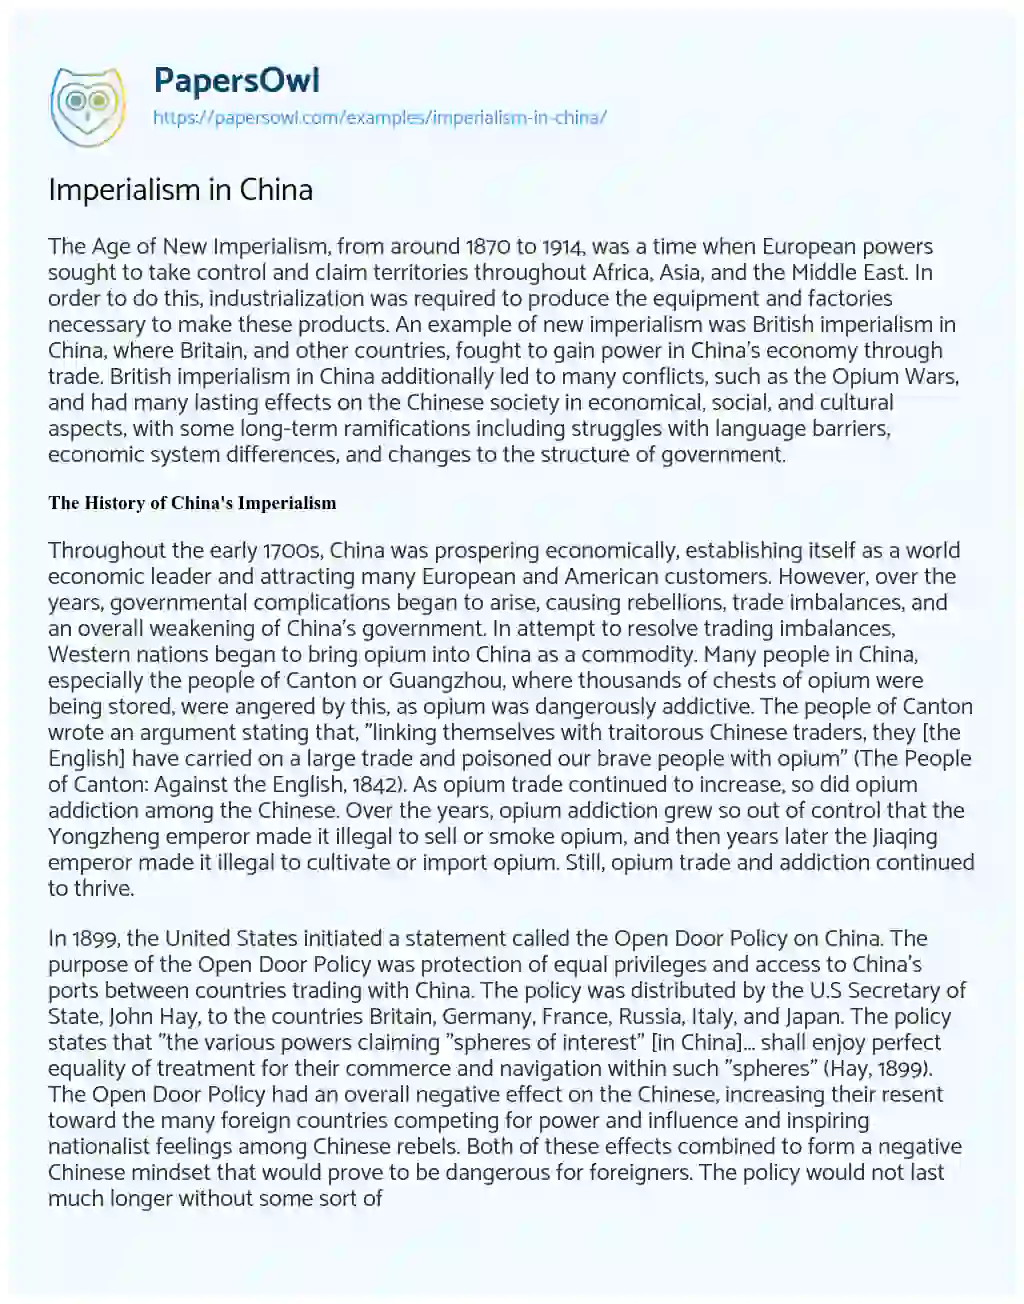 Essay on Imperialism in China